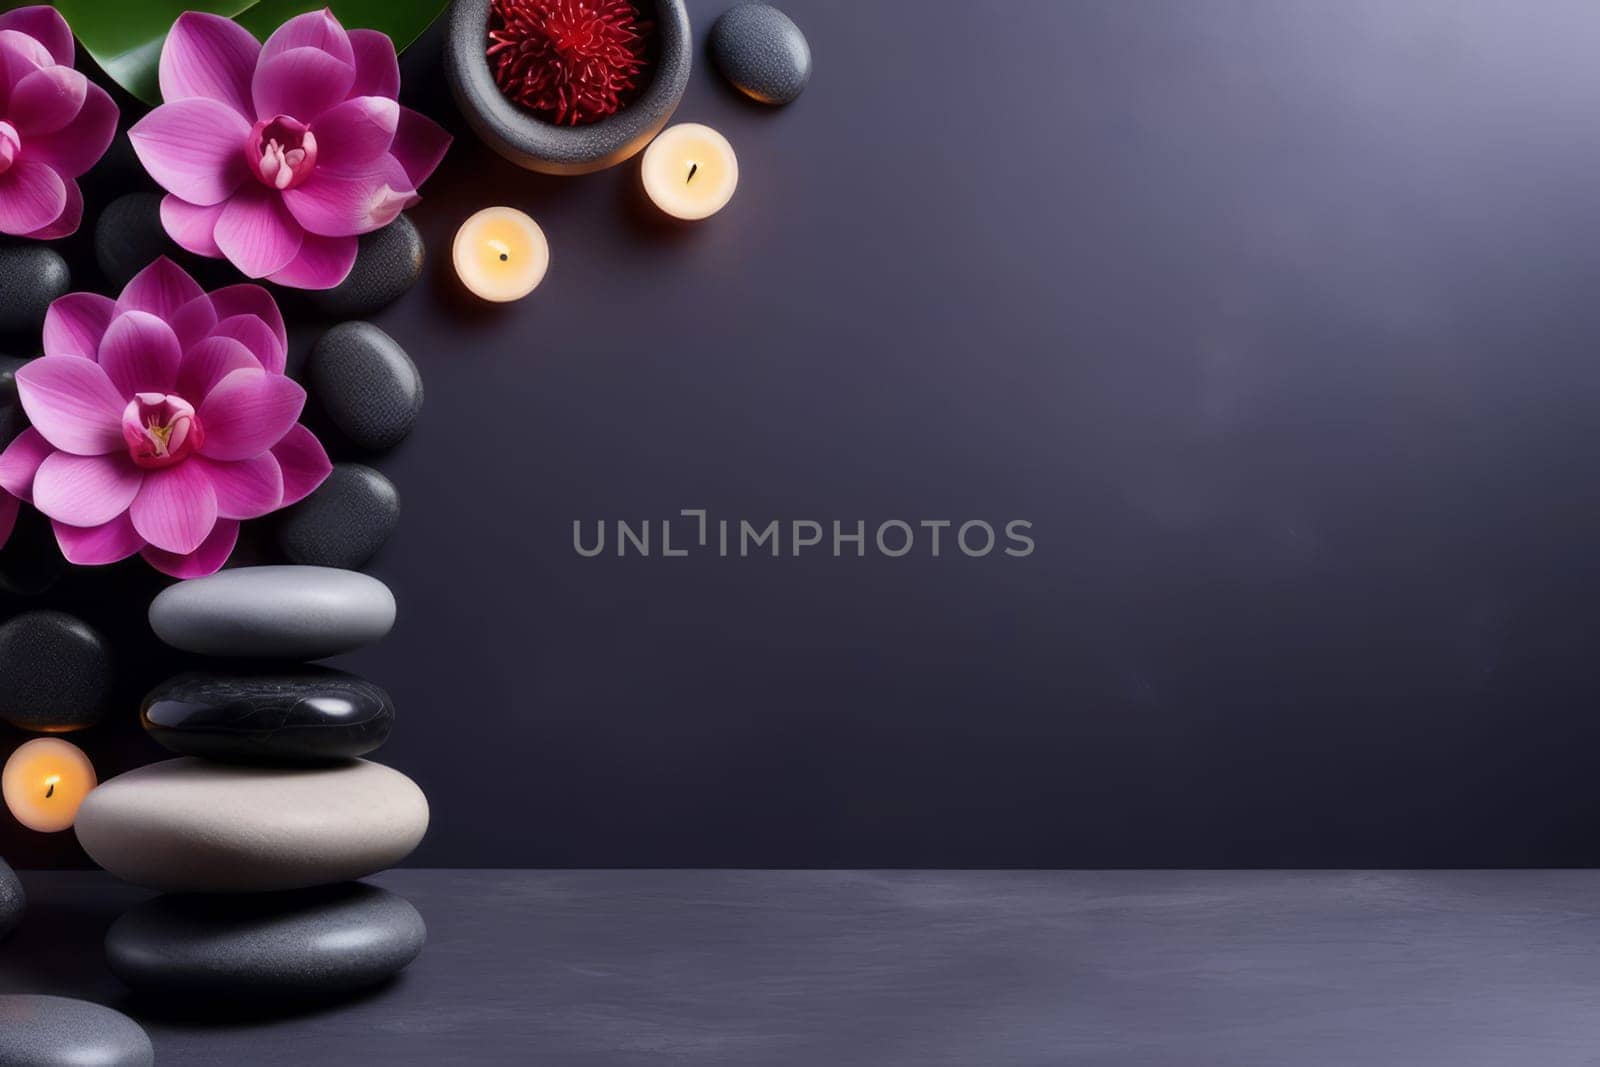 Spa gray background with massage stones, exotic flowers and copy space